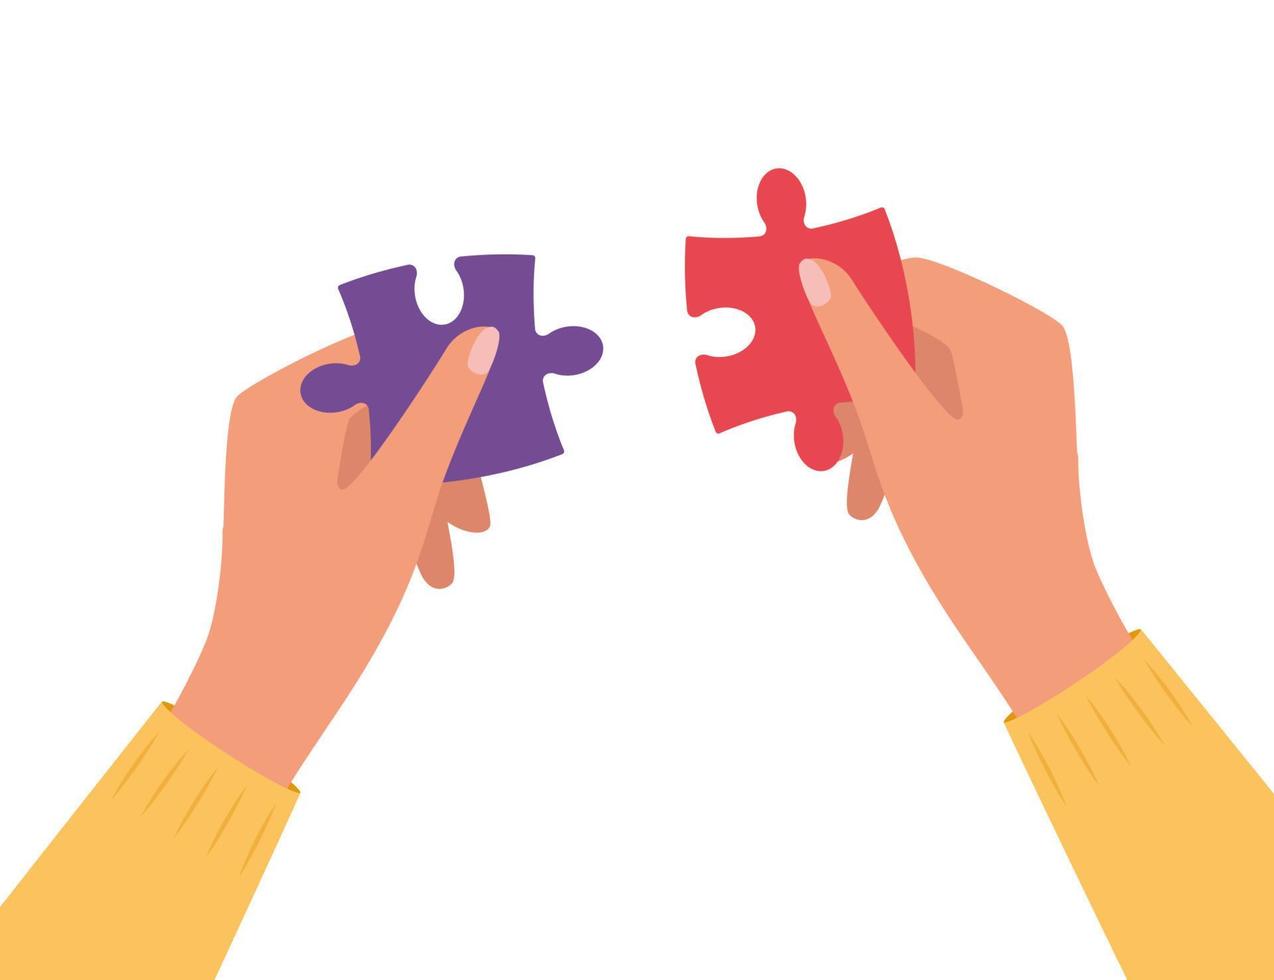 Hands assembling puzzle pieces together. Vector illustration.